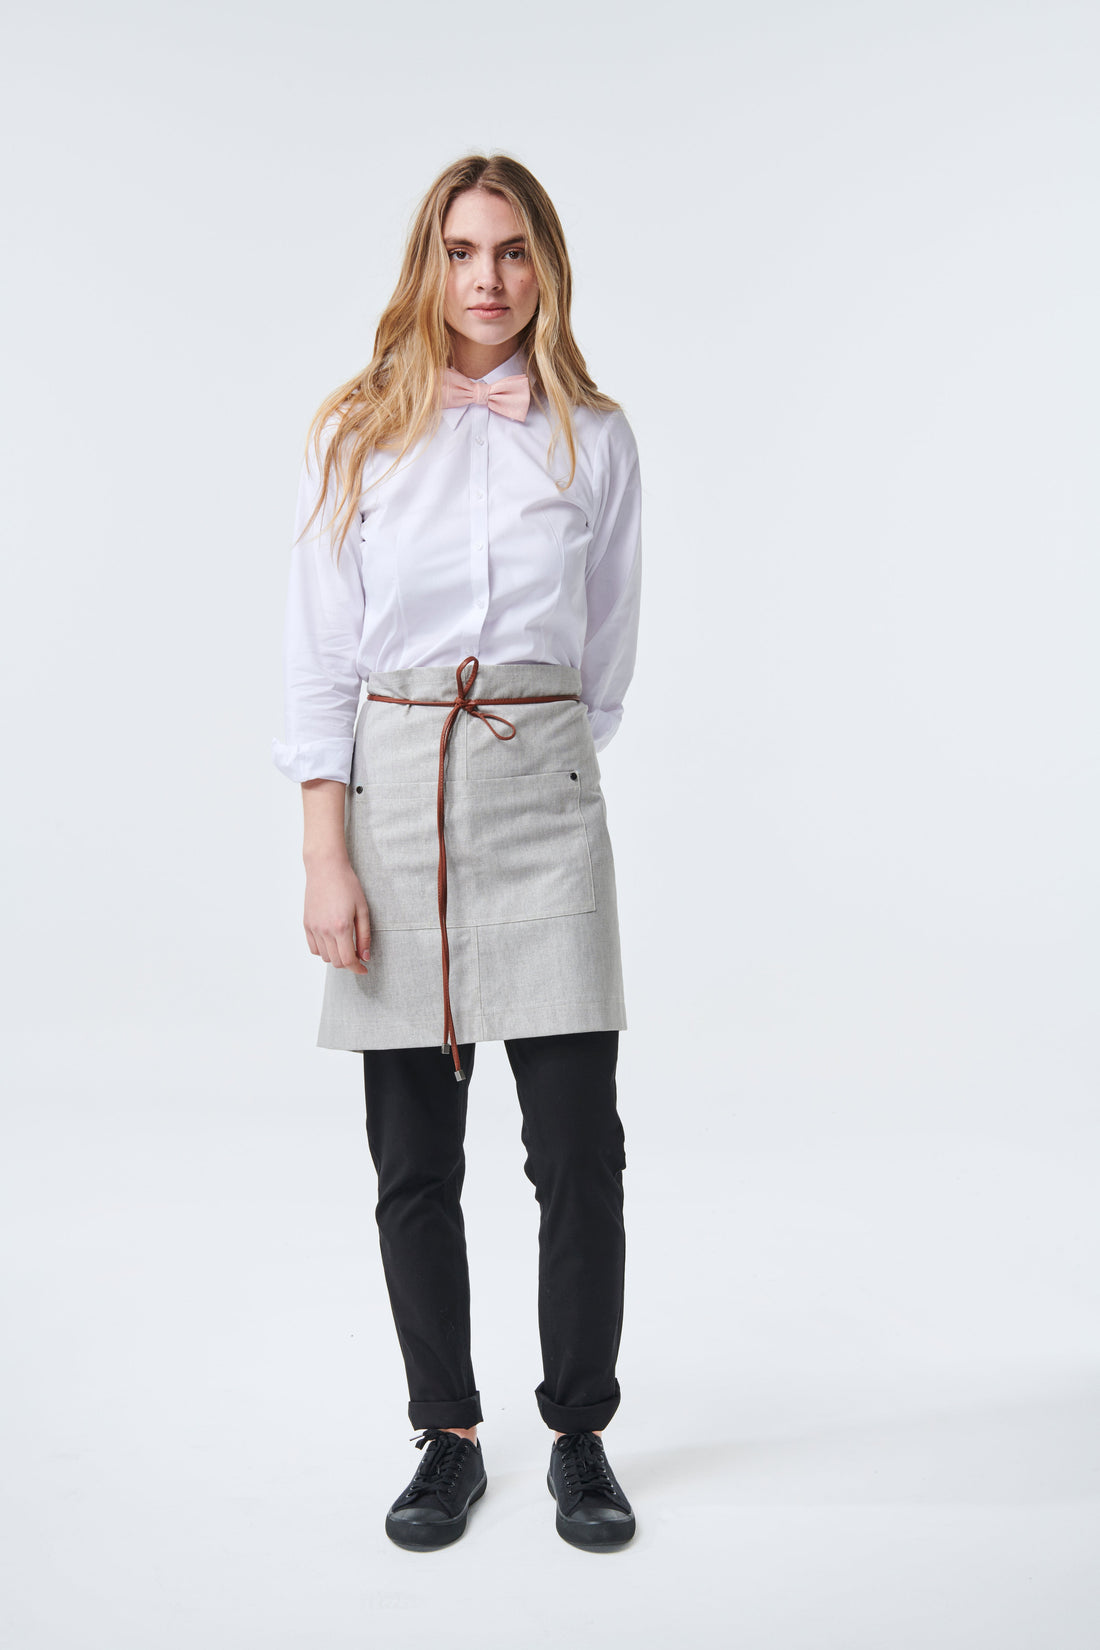 WILLOWDALE - Linen blend Waist Apron with PU leather strap - GATSBY CLOUD